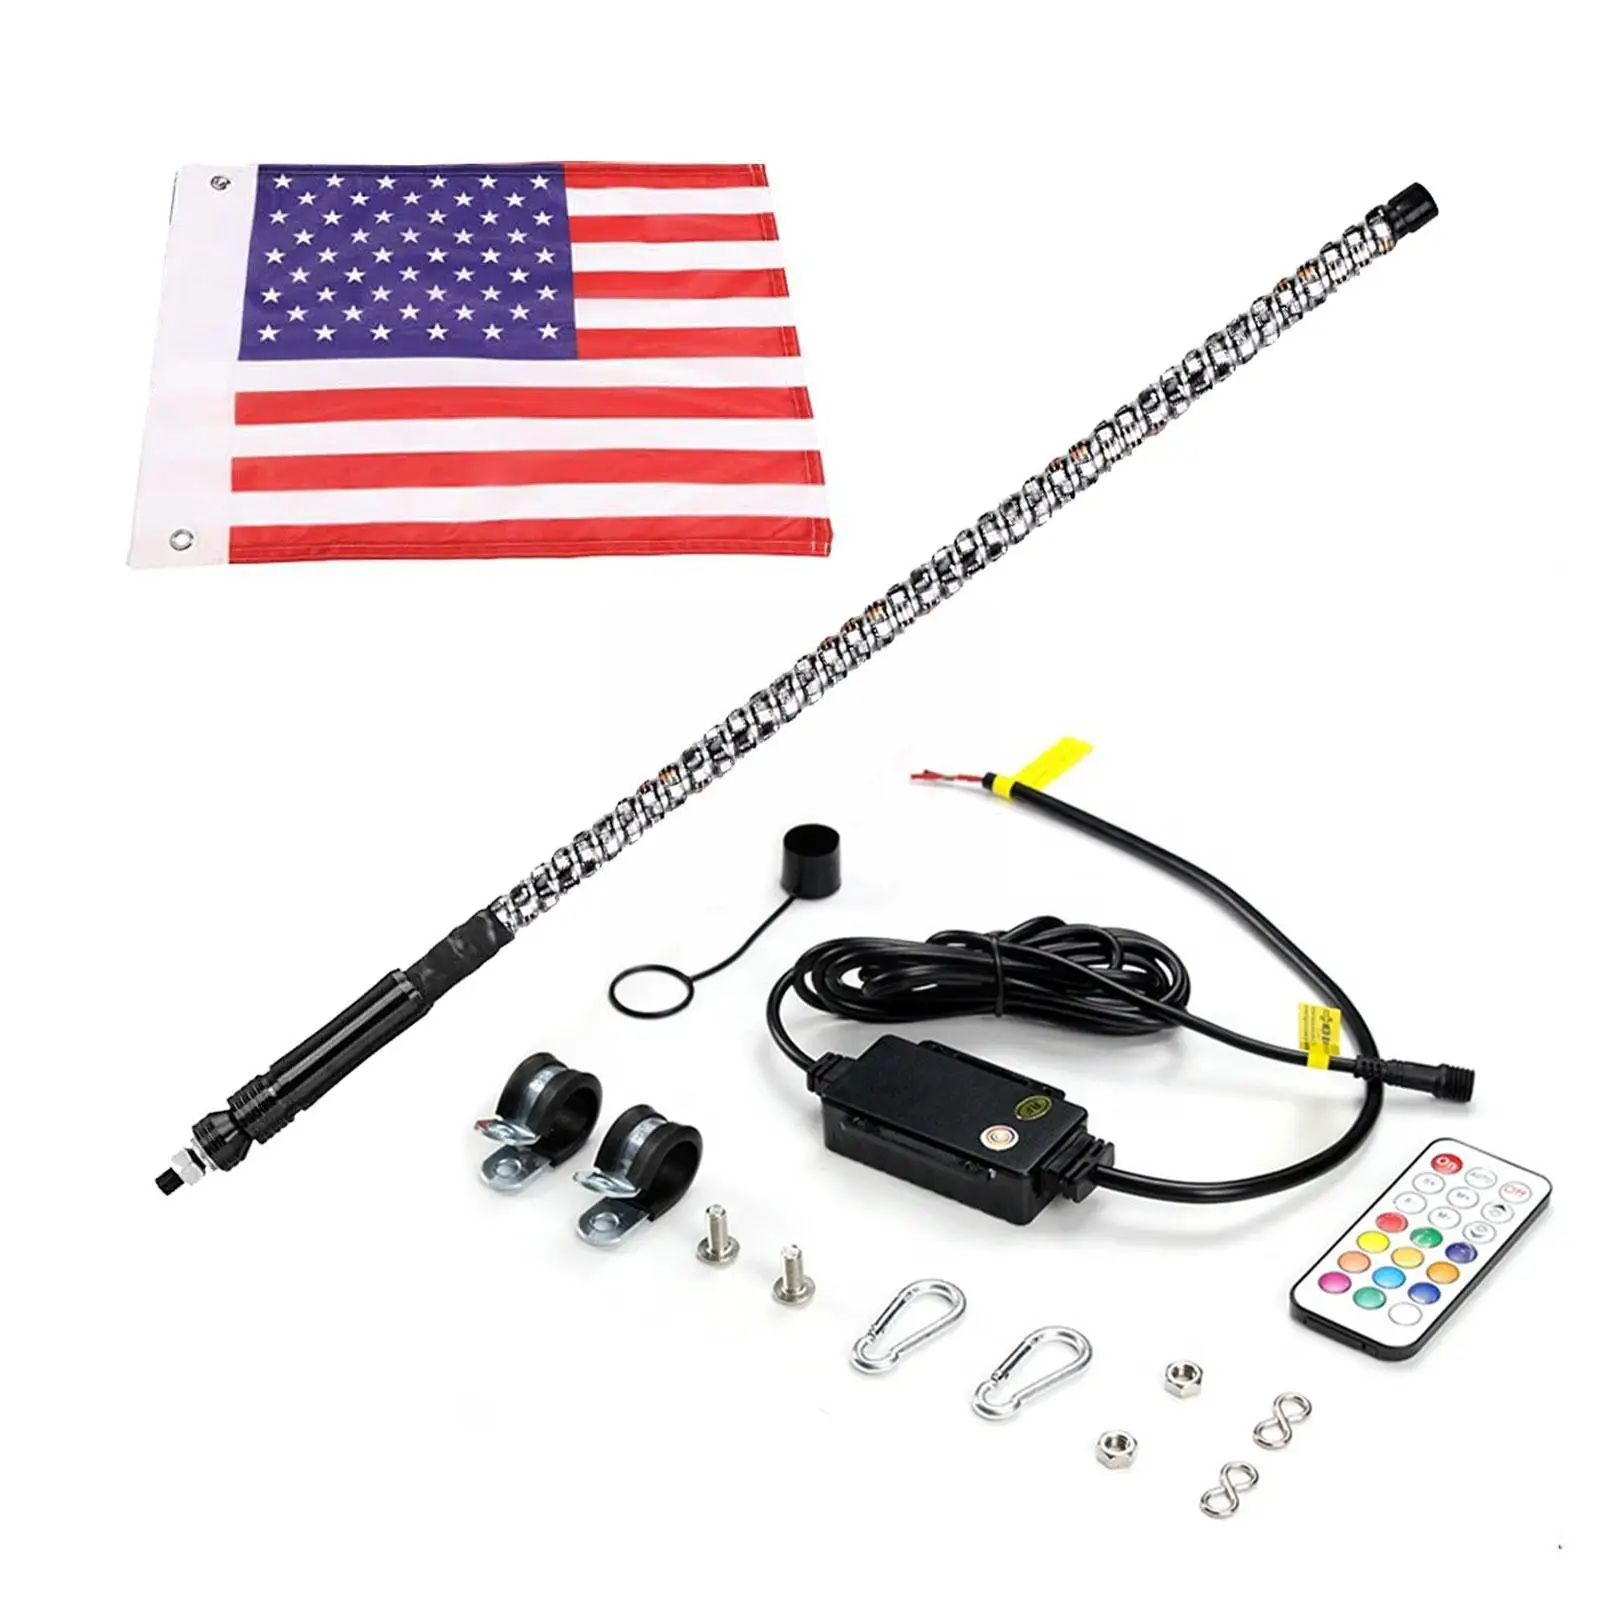 

2ft Rgb Led Beach Marquee Lights For Car Off-road Motorcycle Decoration Antenna Lamp Whip Flag Pole With Flag O1t5